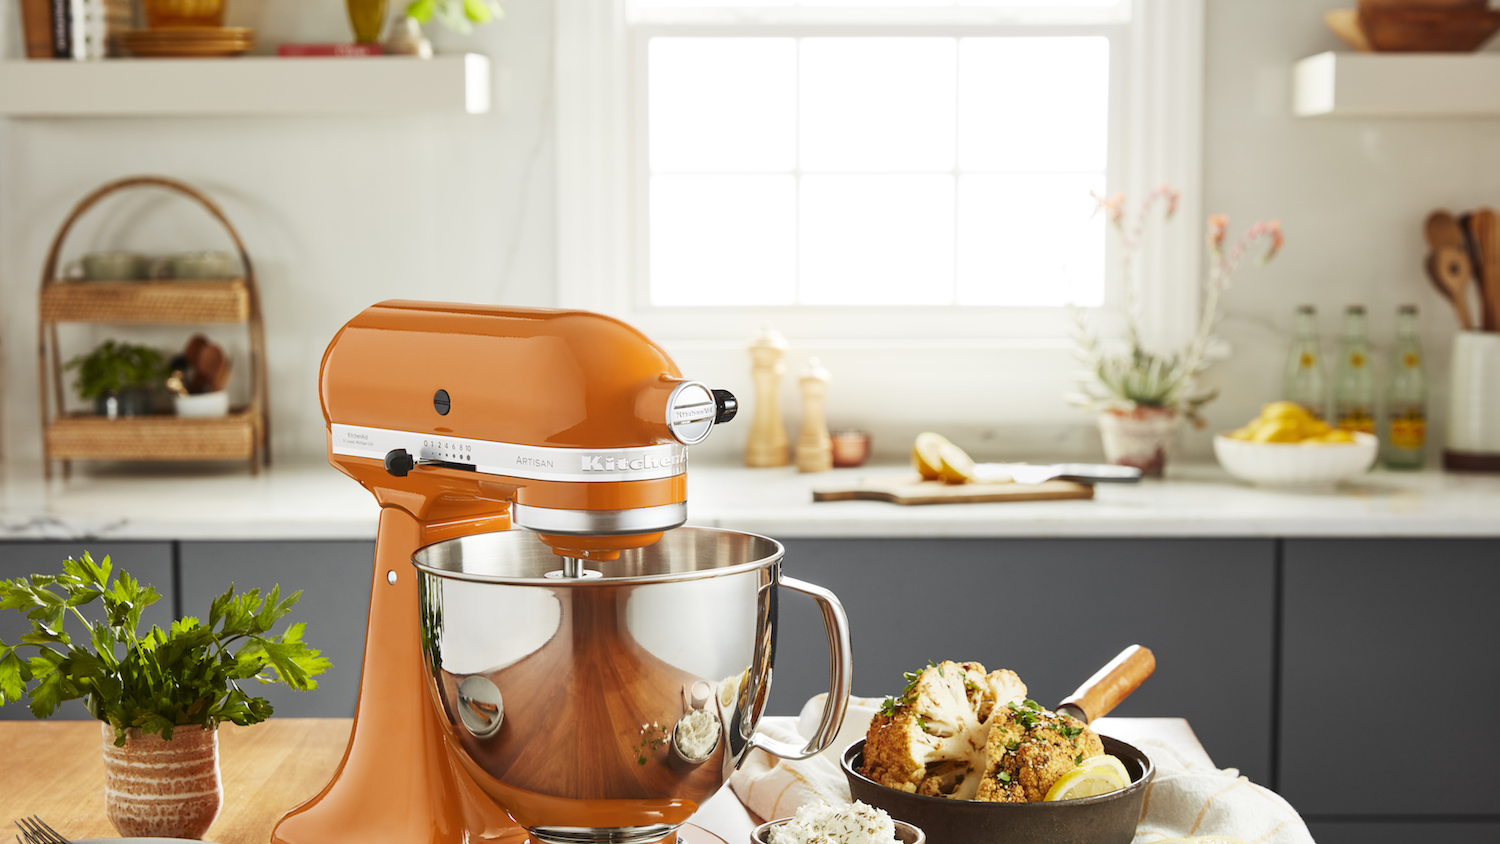 https://hips.hearstapps.com/hmg-prod/images/kitchenaid-stand-mixer-honey-lifestyle-2-1612972936.png?crop=1xw:0.825587084148728xh;center,top